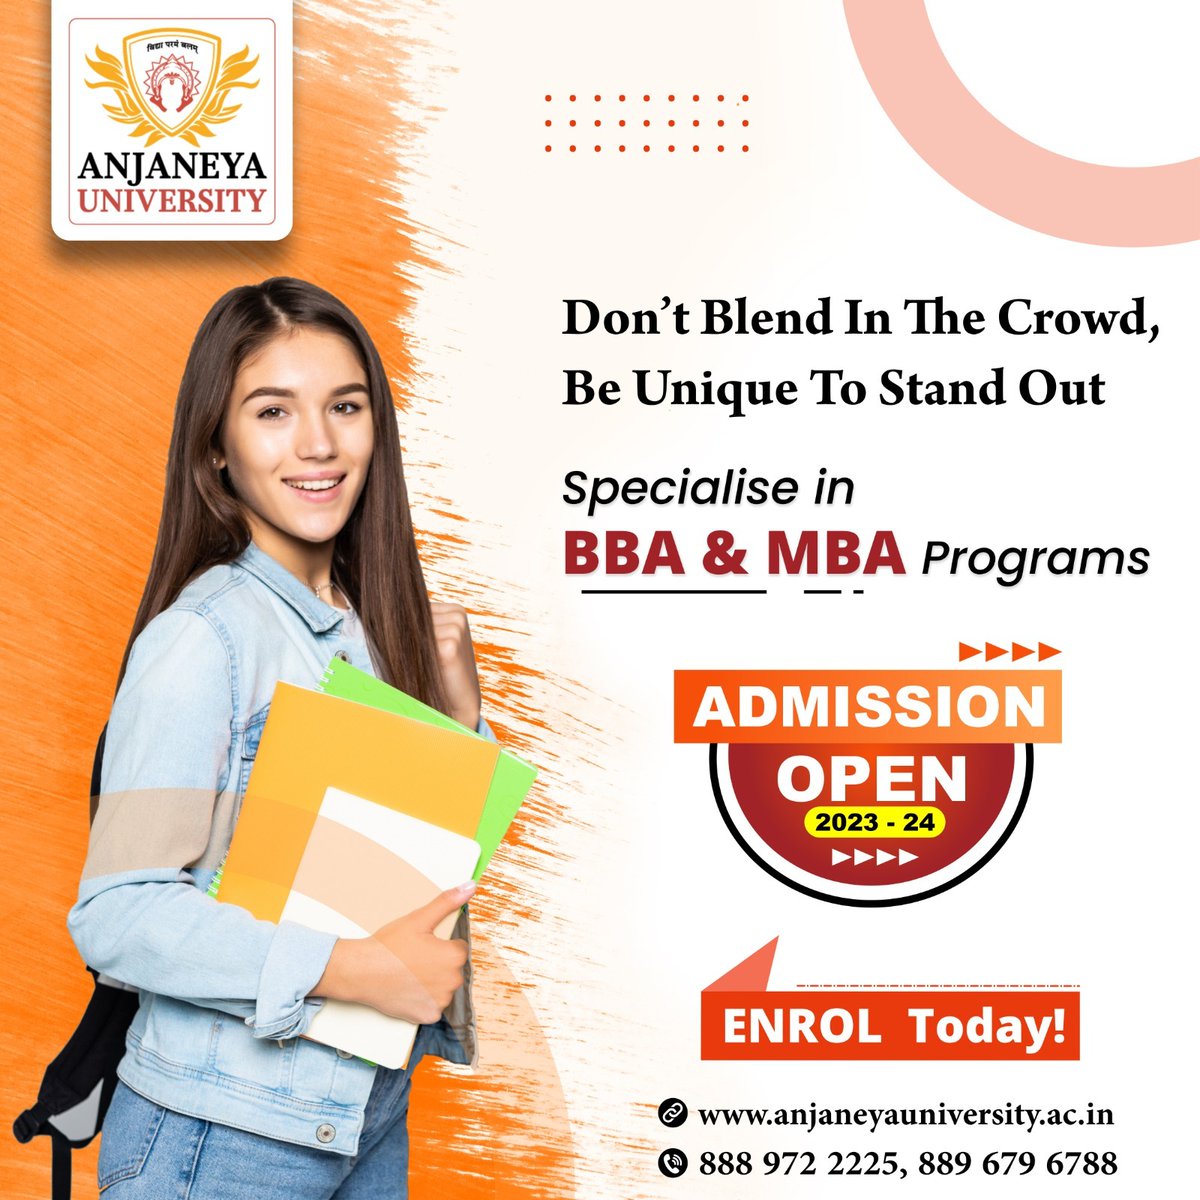 Unleash your potential as a business leader at #AnjaneyaUniversity. Our #BBA & #MBA programs equip you with essential business skills and strategic management expertise for a thriving corporate career. Join us now for endless career opportunities. #AdmissionOpen2023 #EnrolToday